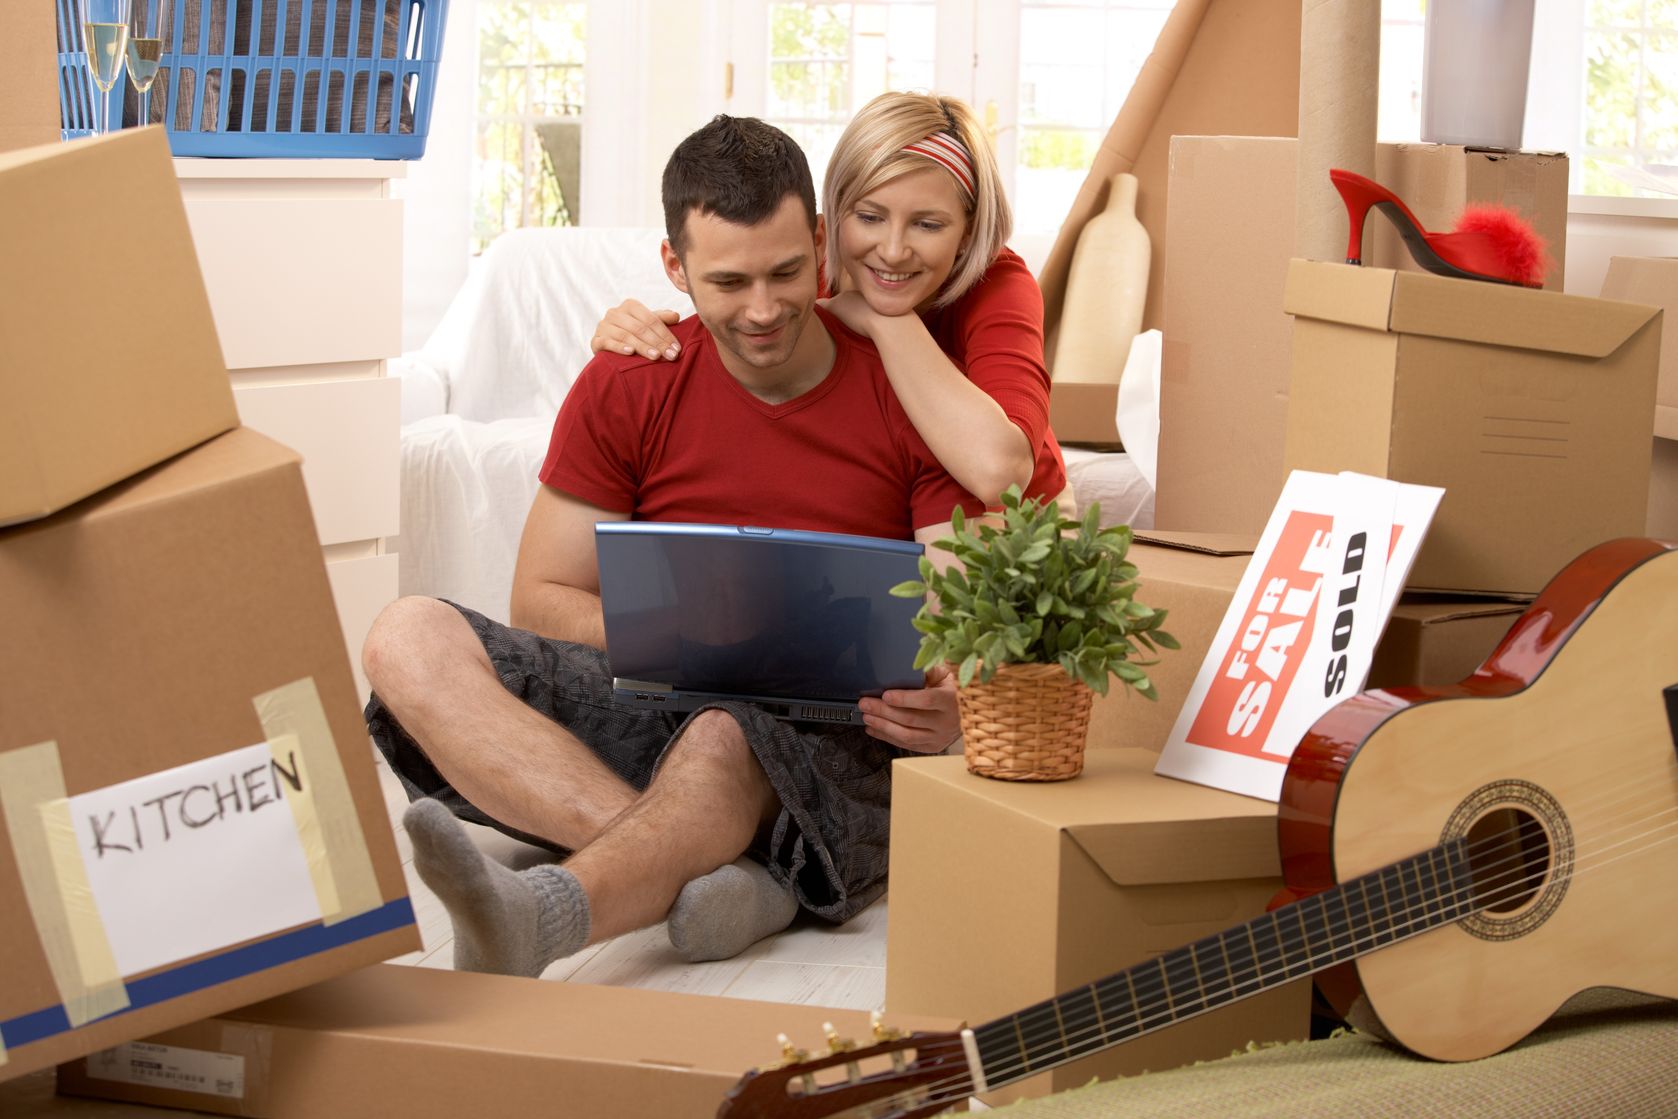 Man and Woman surrounded by moving boxes and looking at laptop